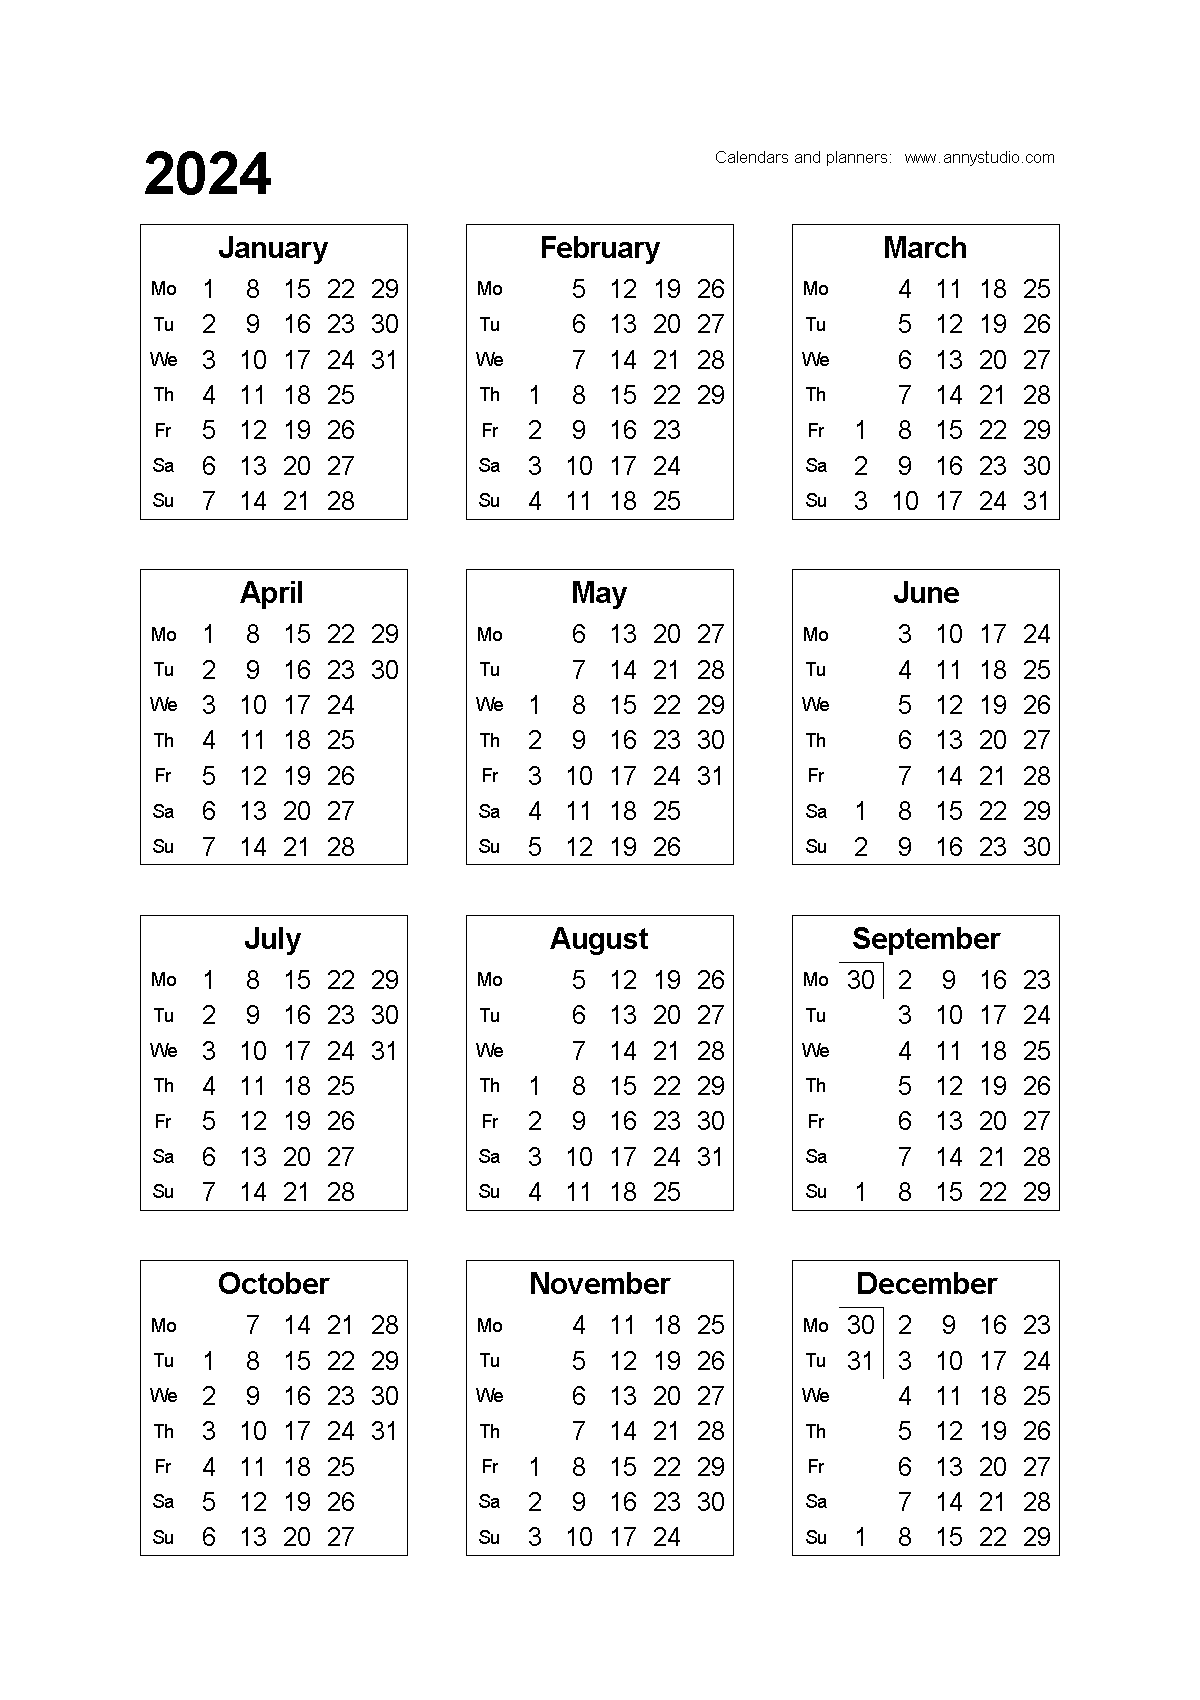 Free Printable Calendars And Planners 2024, 2025 And 2026 regarding Free Printable Calendar 2024 Pocket Size